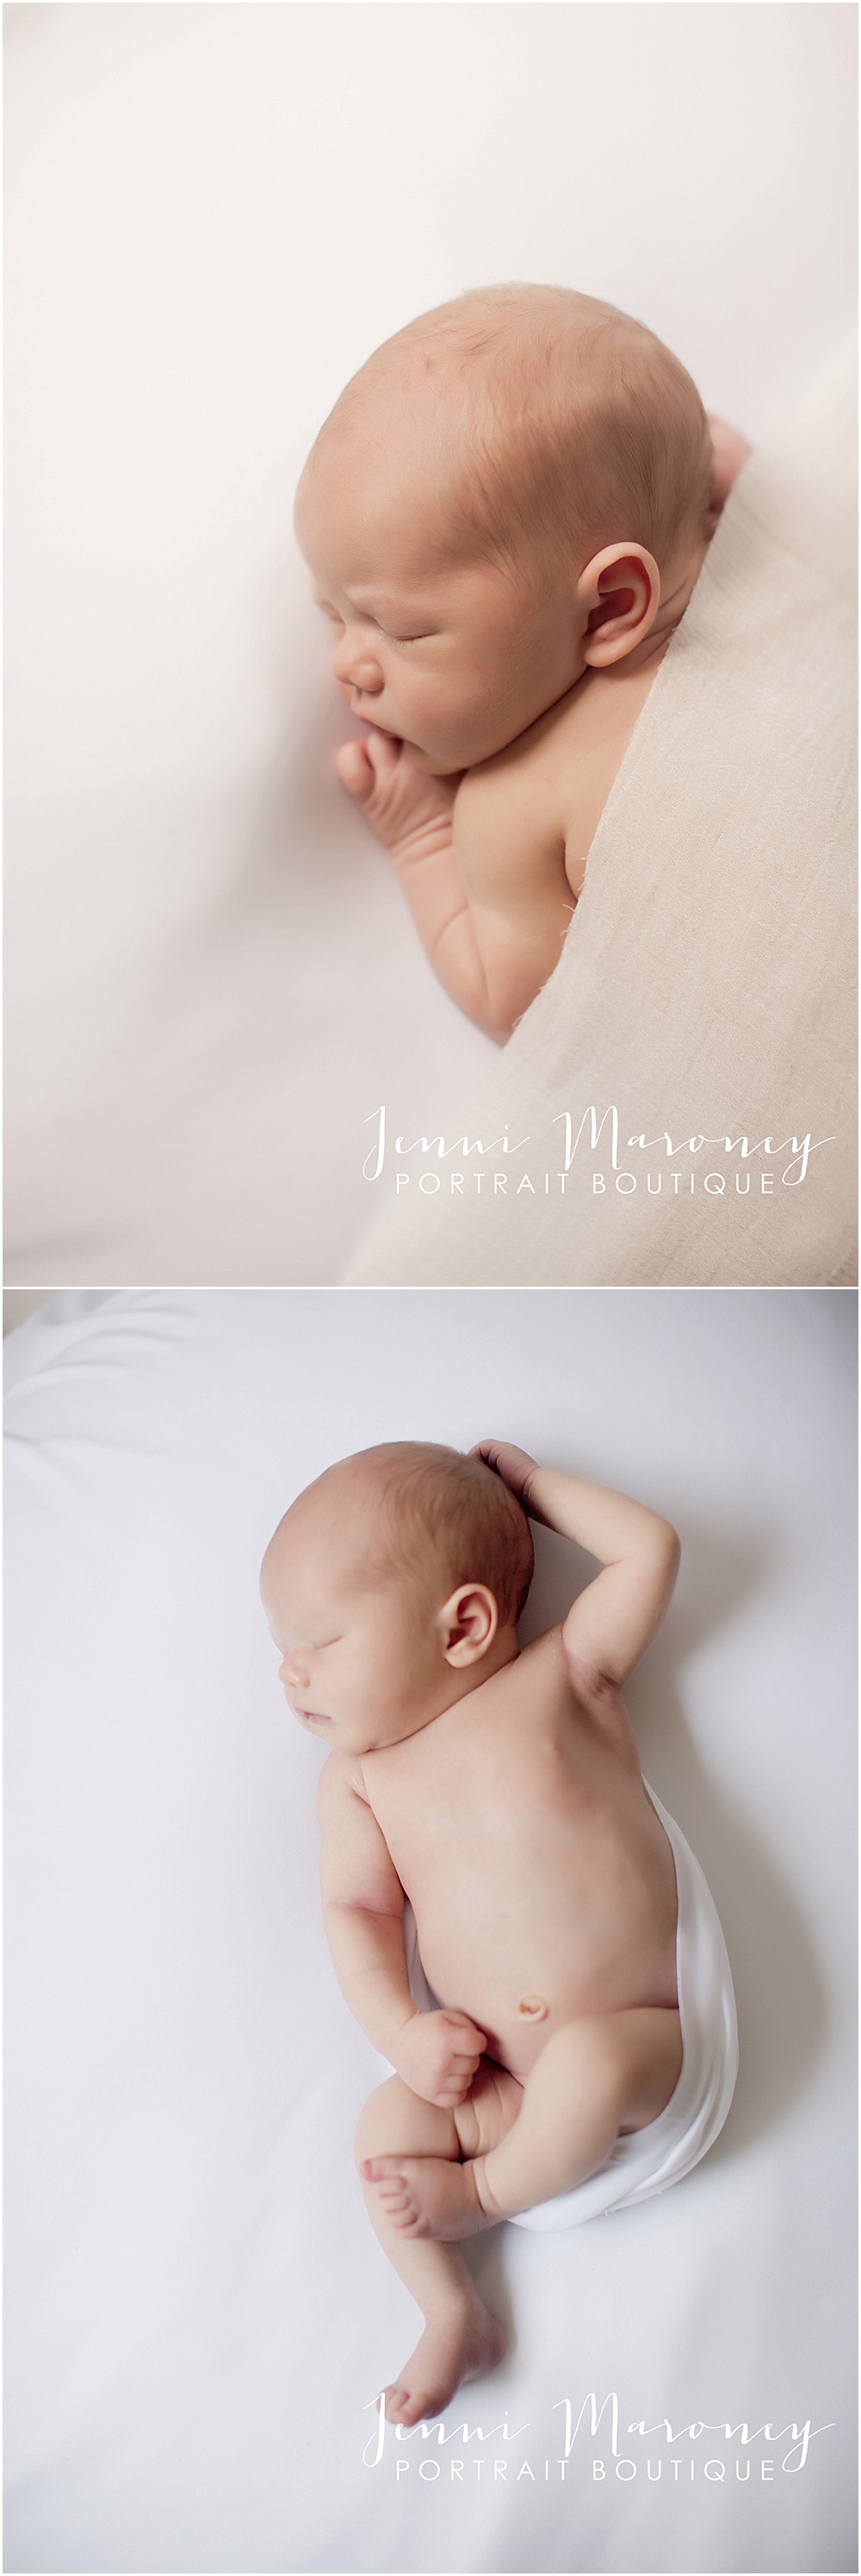 Denver newborn photographer and Boulder baby photographer, Jenni Maroney owns Jenni Maroney Portrait Boutique and specializes in simple and sweet newborn photography.  Newborn baby boy in-studio for Denver newborn photos. 